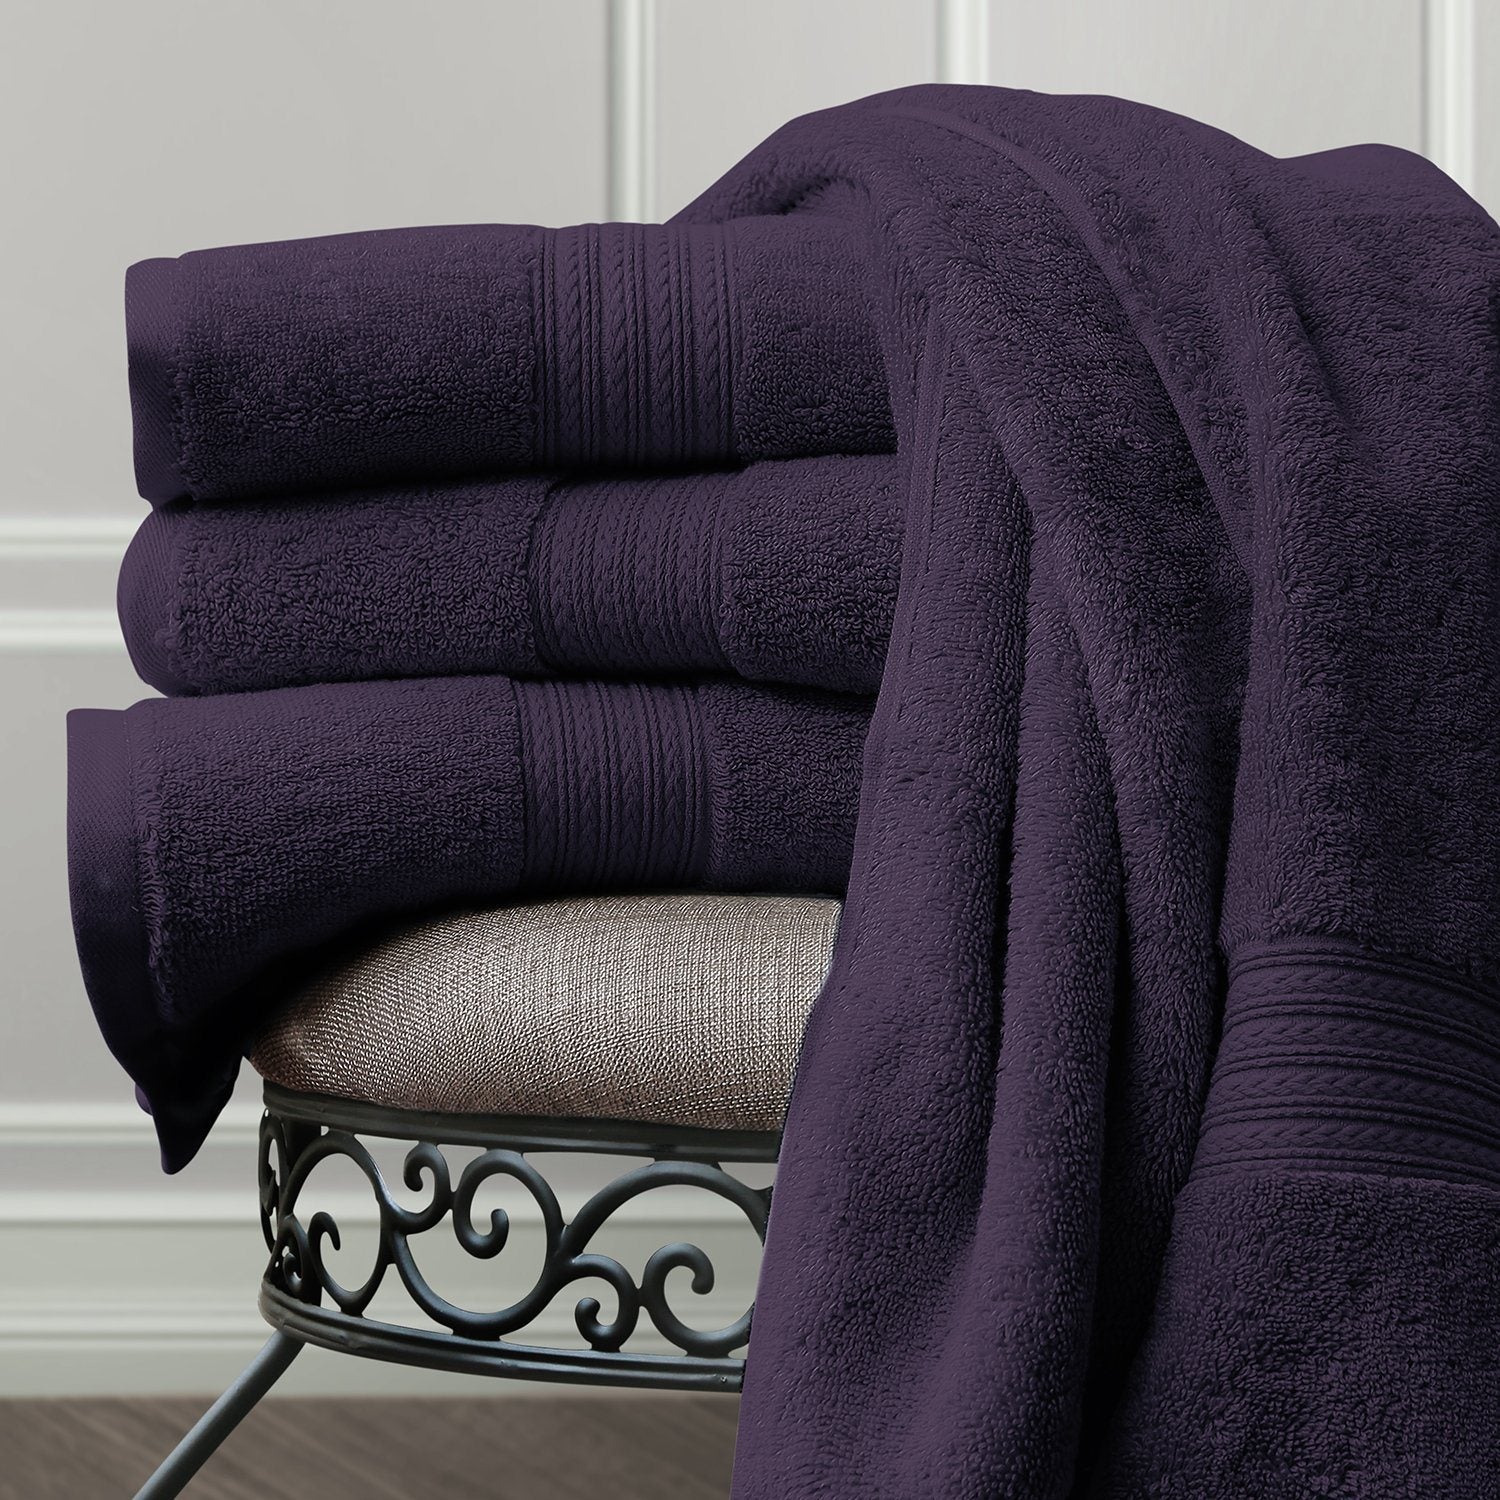 Luxury Egyptian Cotton Towels, Towels & Bath Sheets